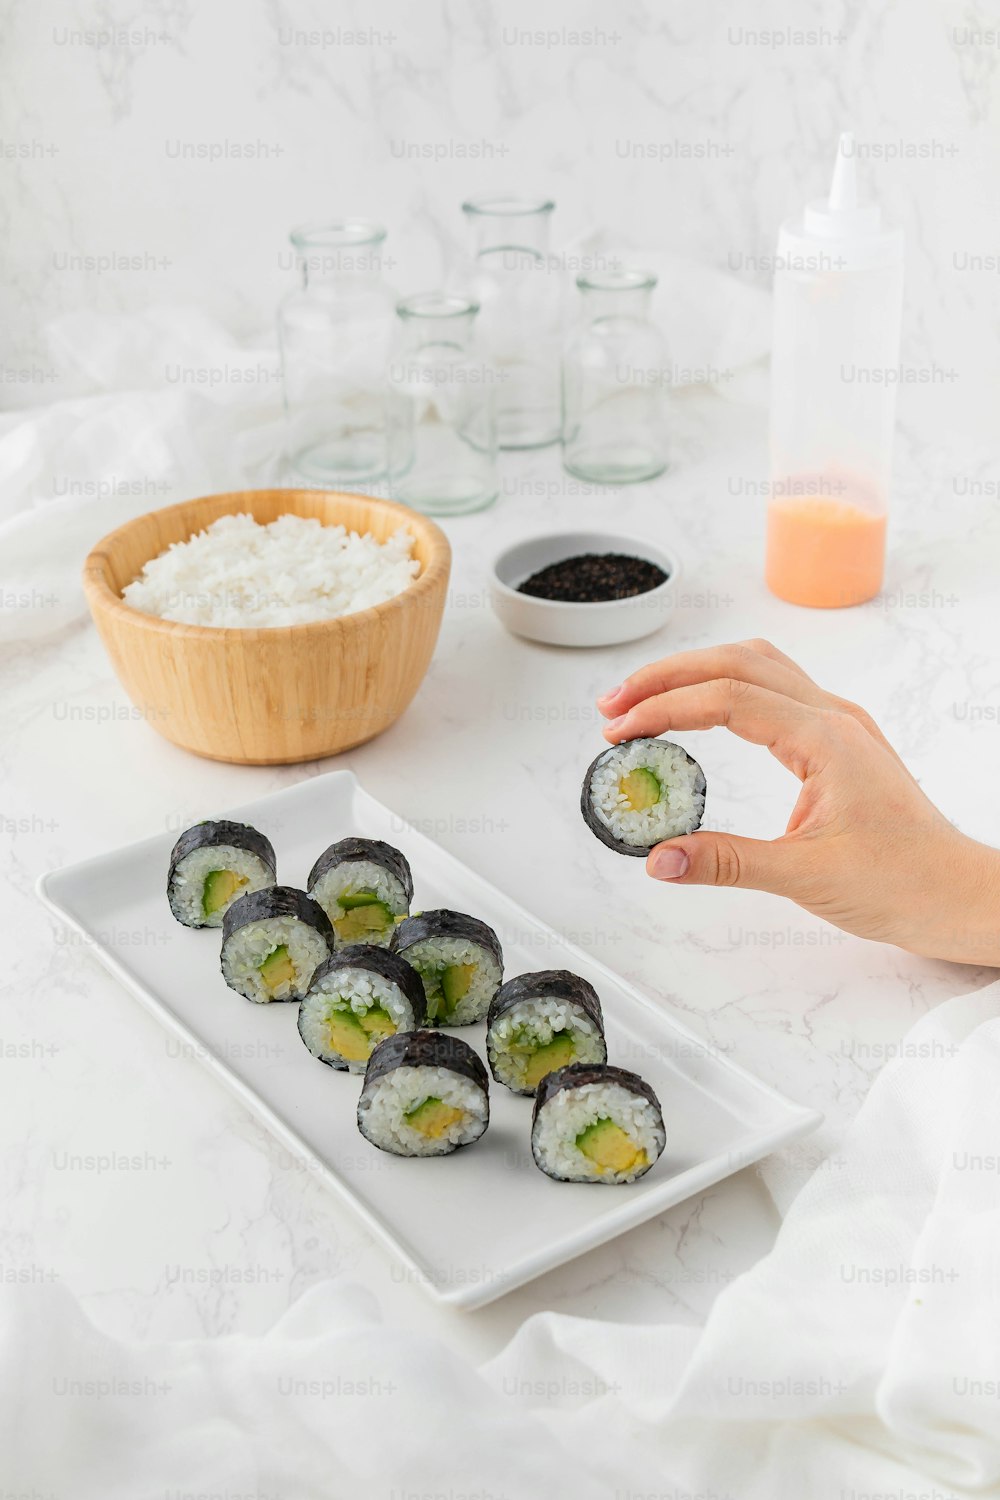 a person is holding a sushi in their hand